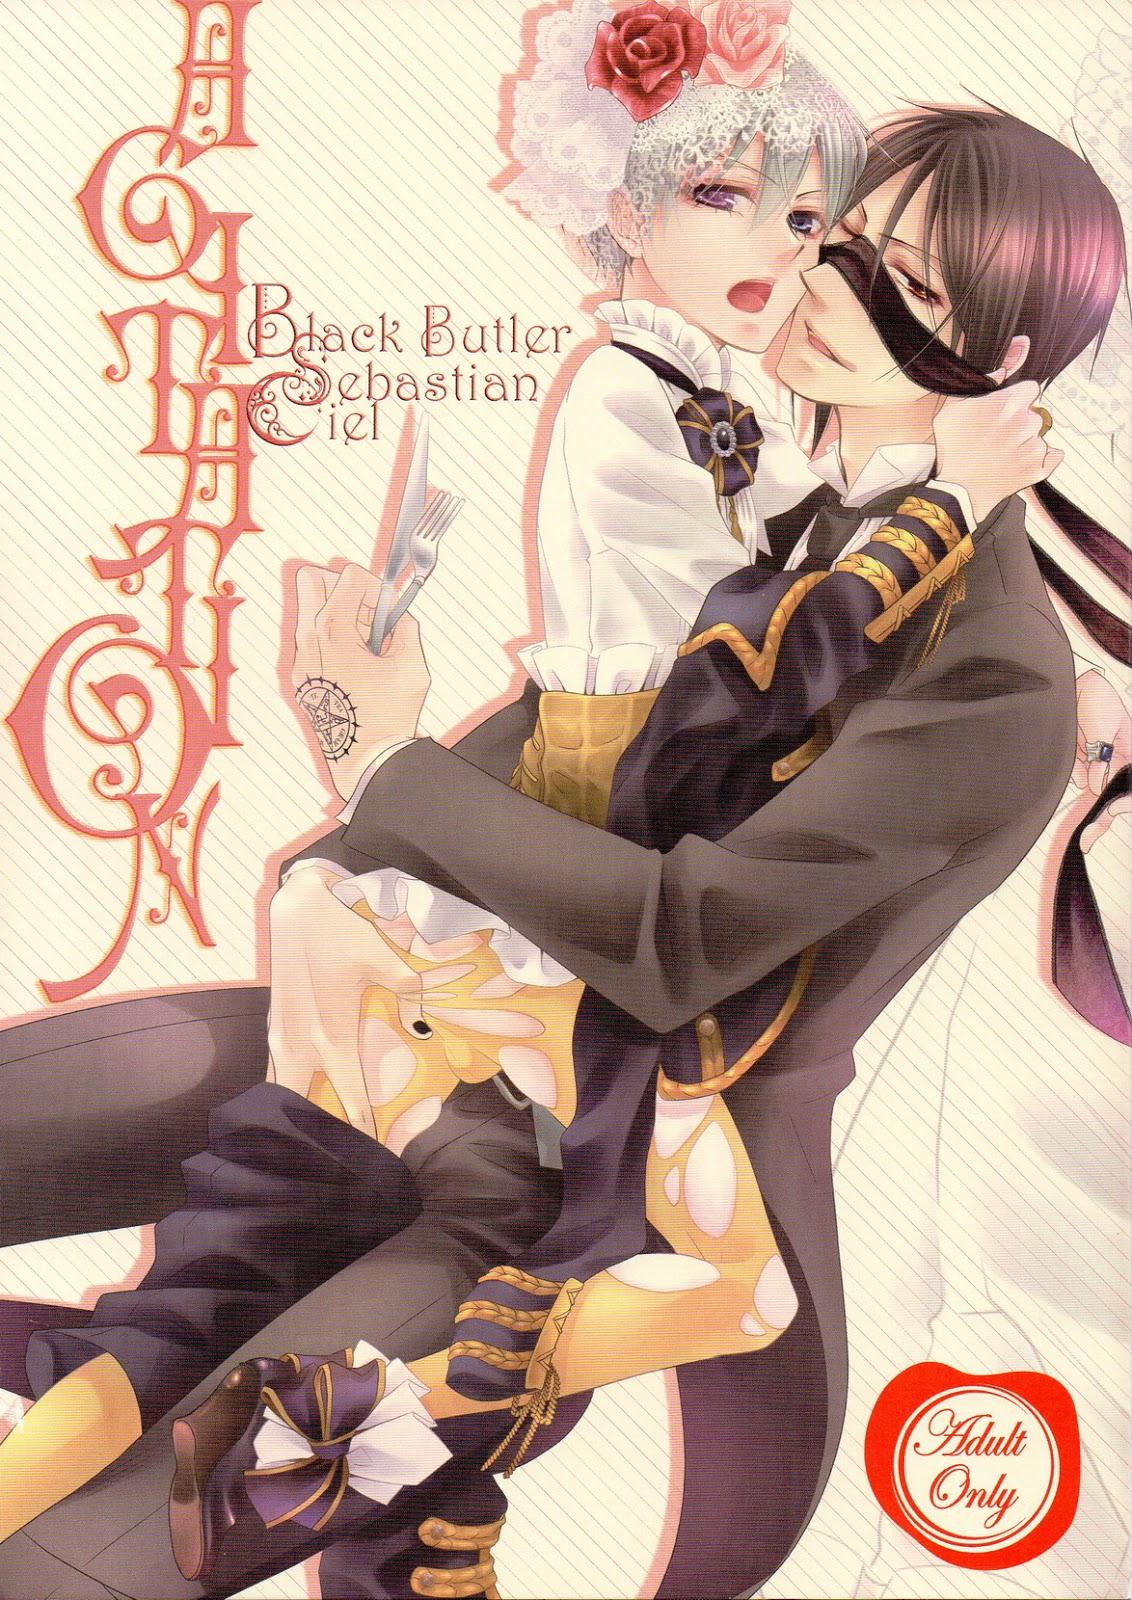 Real Couple agitation - Black butler Lolicon - Picture 1